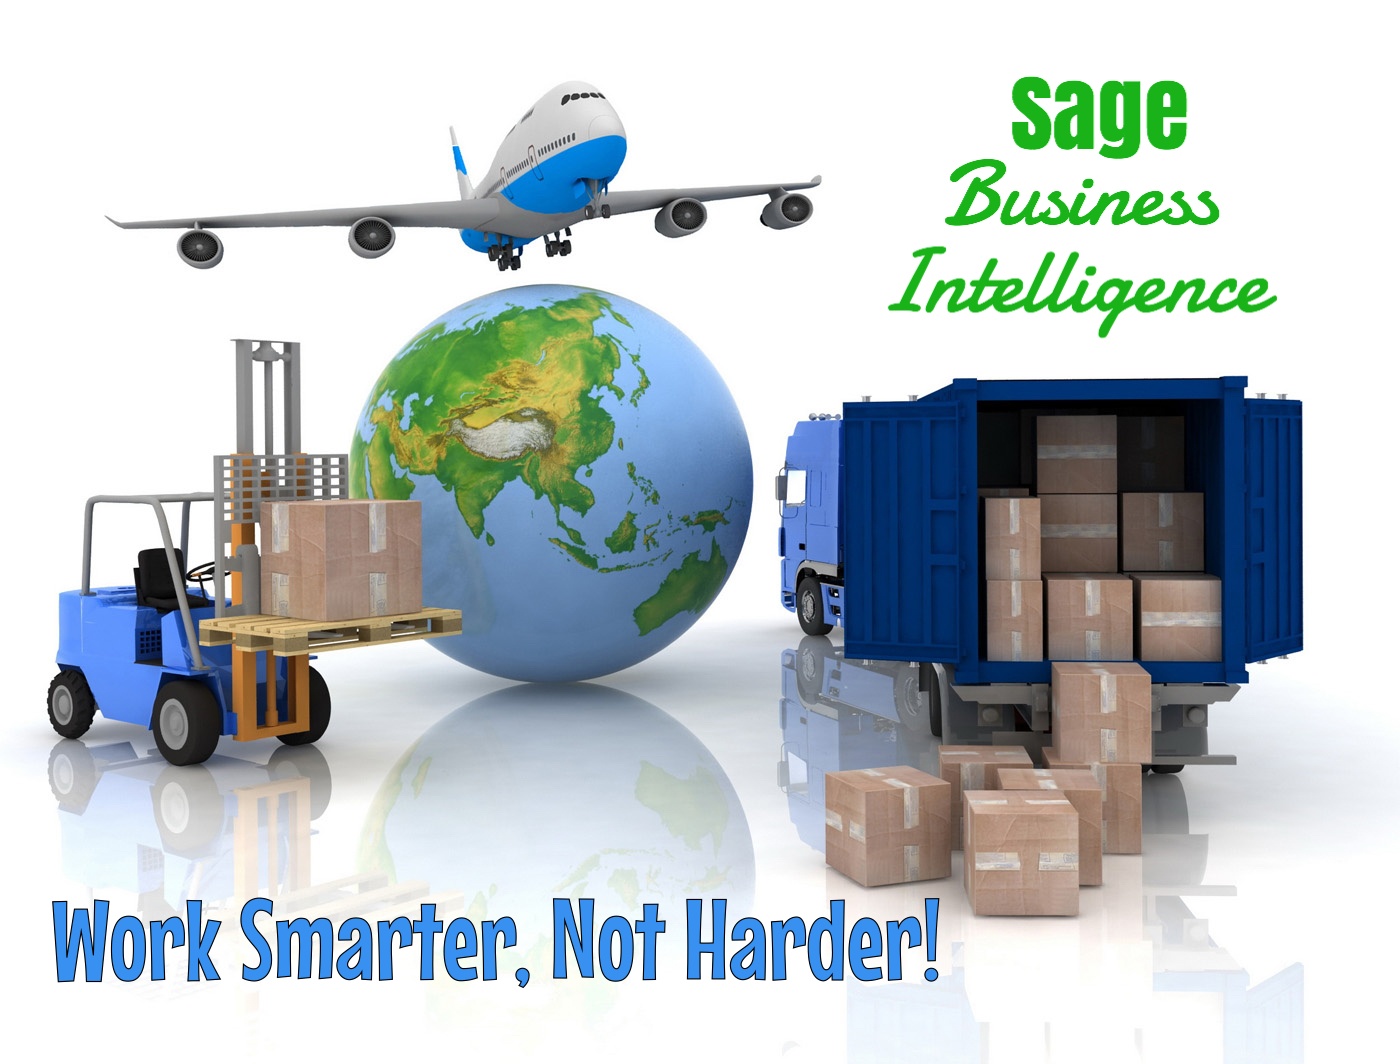 Sage business intelligence allows your SMB to work smarter, not harder.